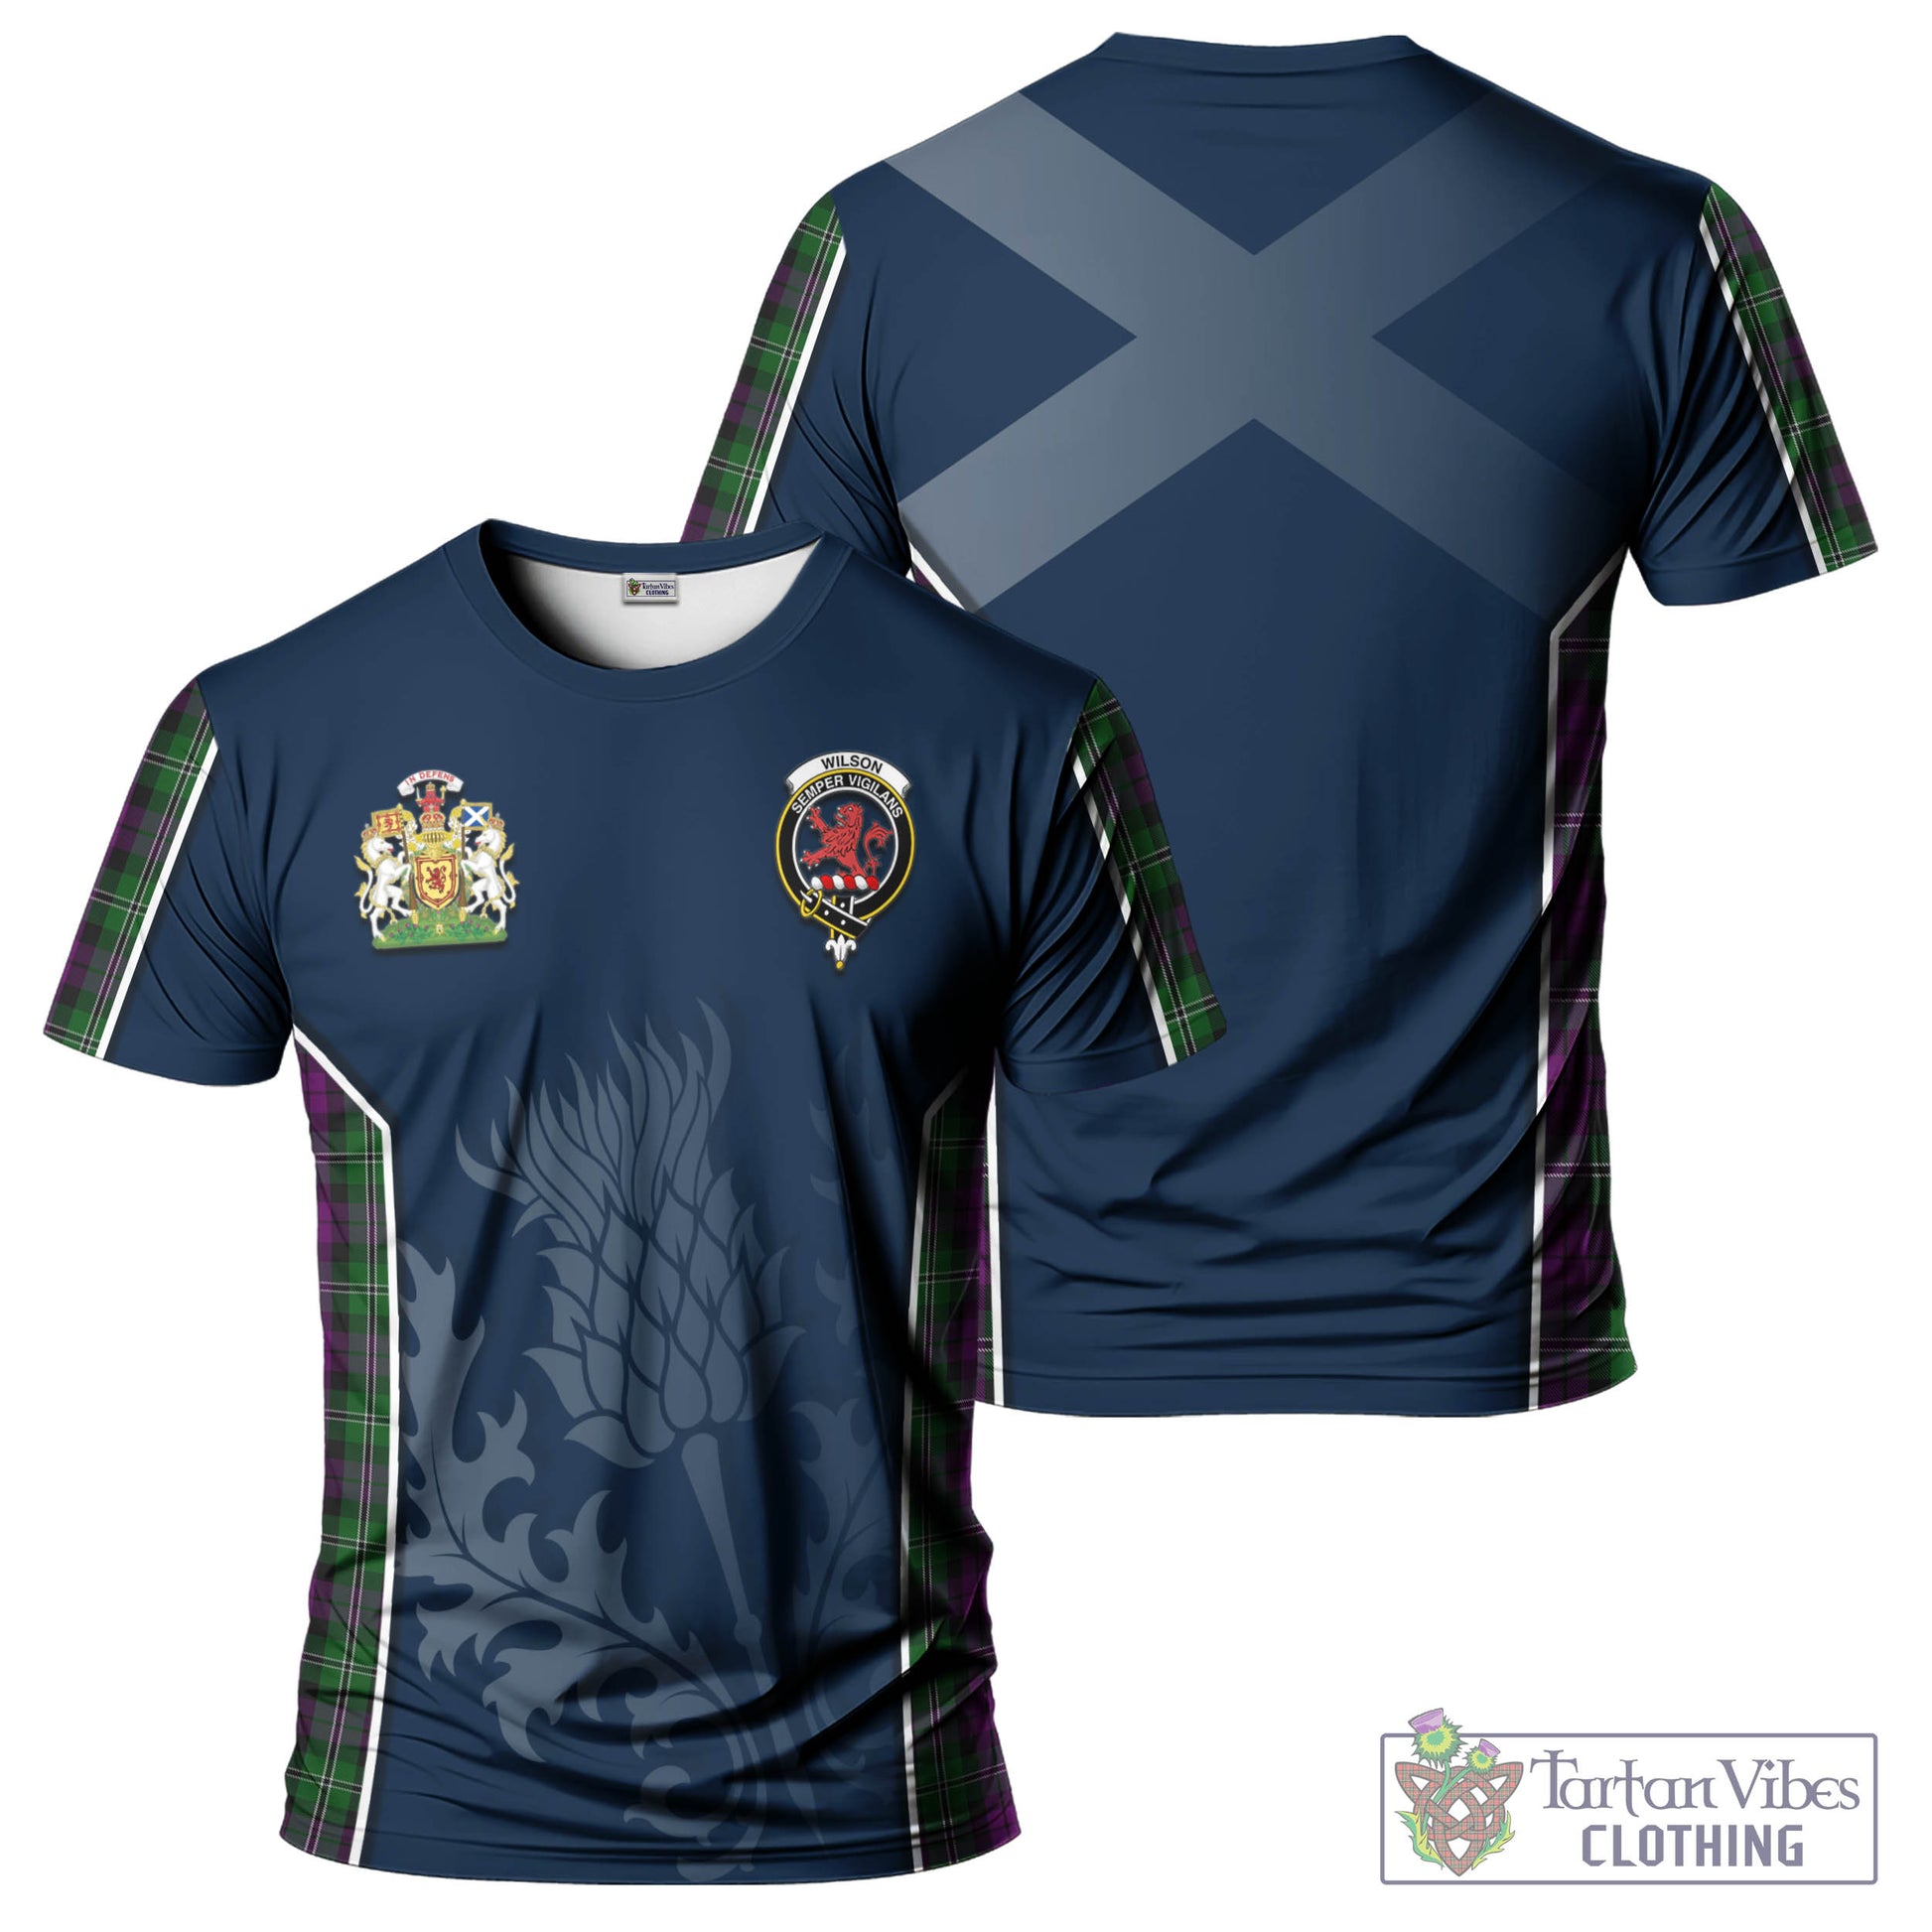 Tartan Vibes Clothing Wilson Tartan T-Shirt with Family Crest and Scottish Thistle Vibes Sport Style